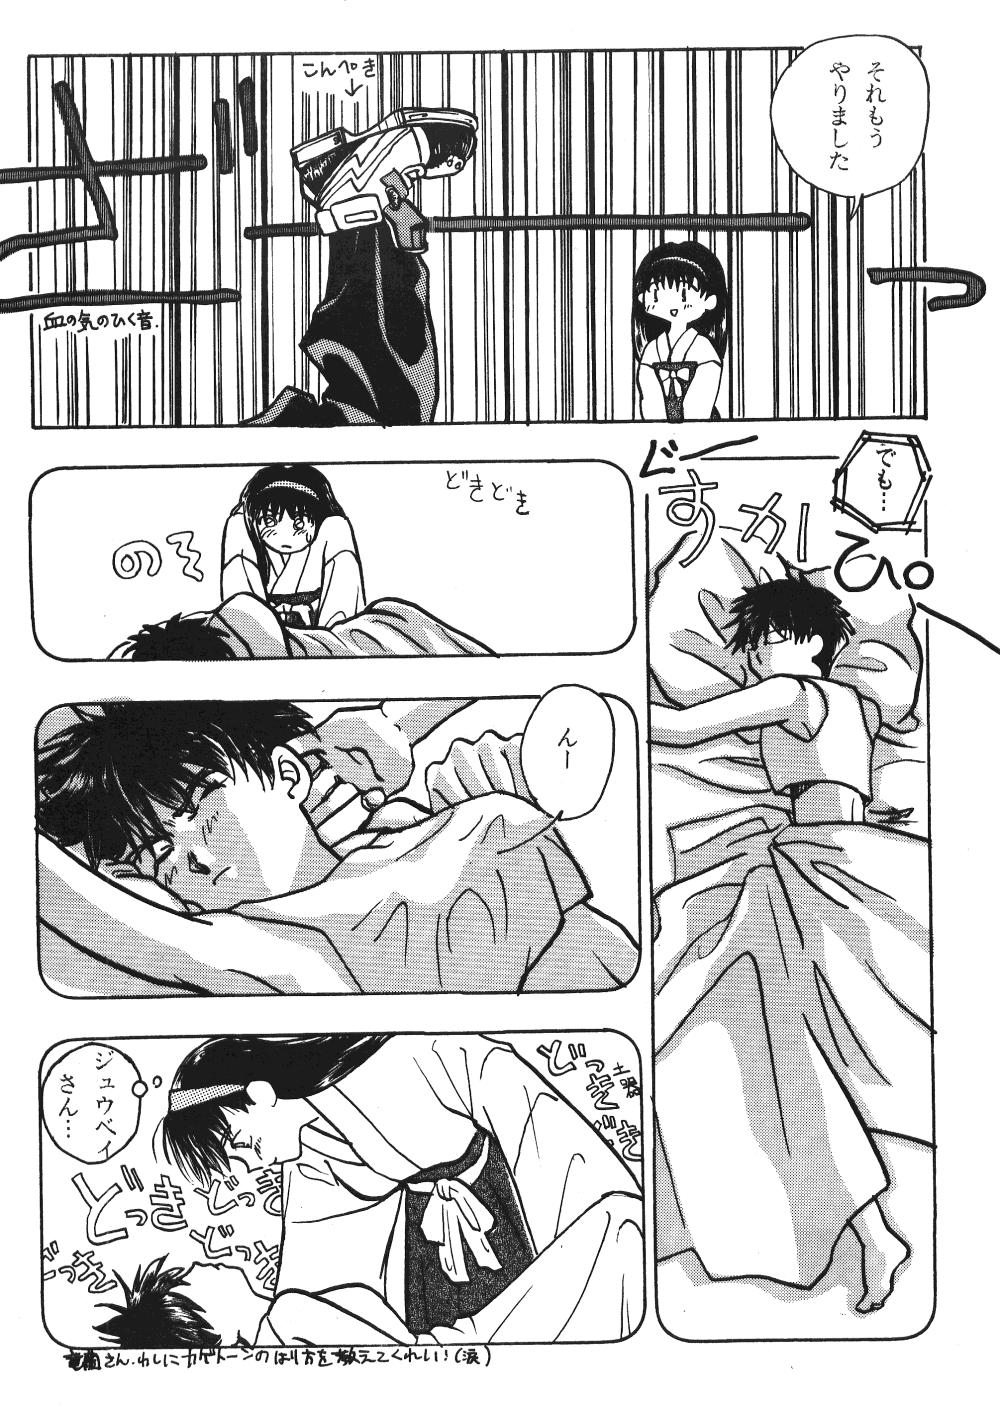 Sucking Dick Seinen Sunday - Street fighter Ranma 12 Ghost sweeper mikami Abuse - Page 11